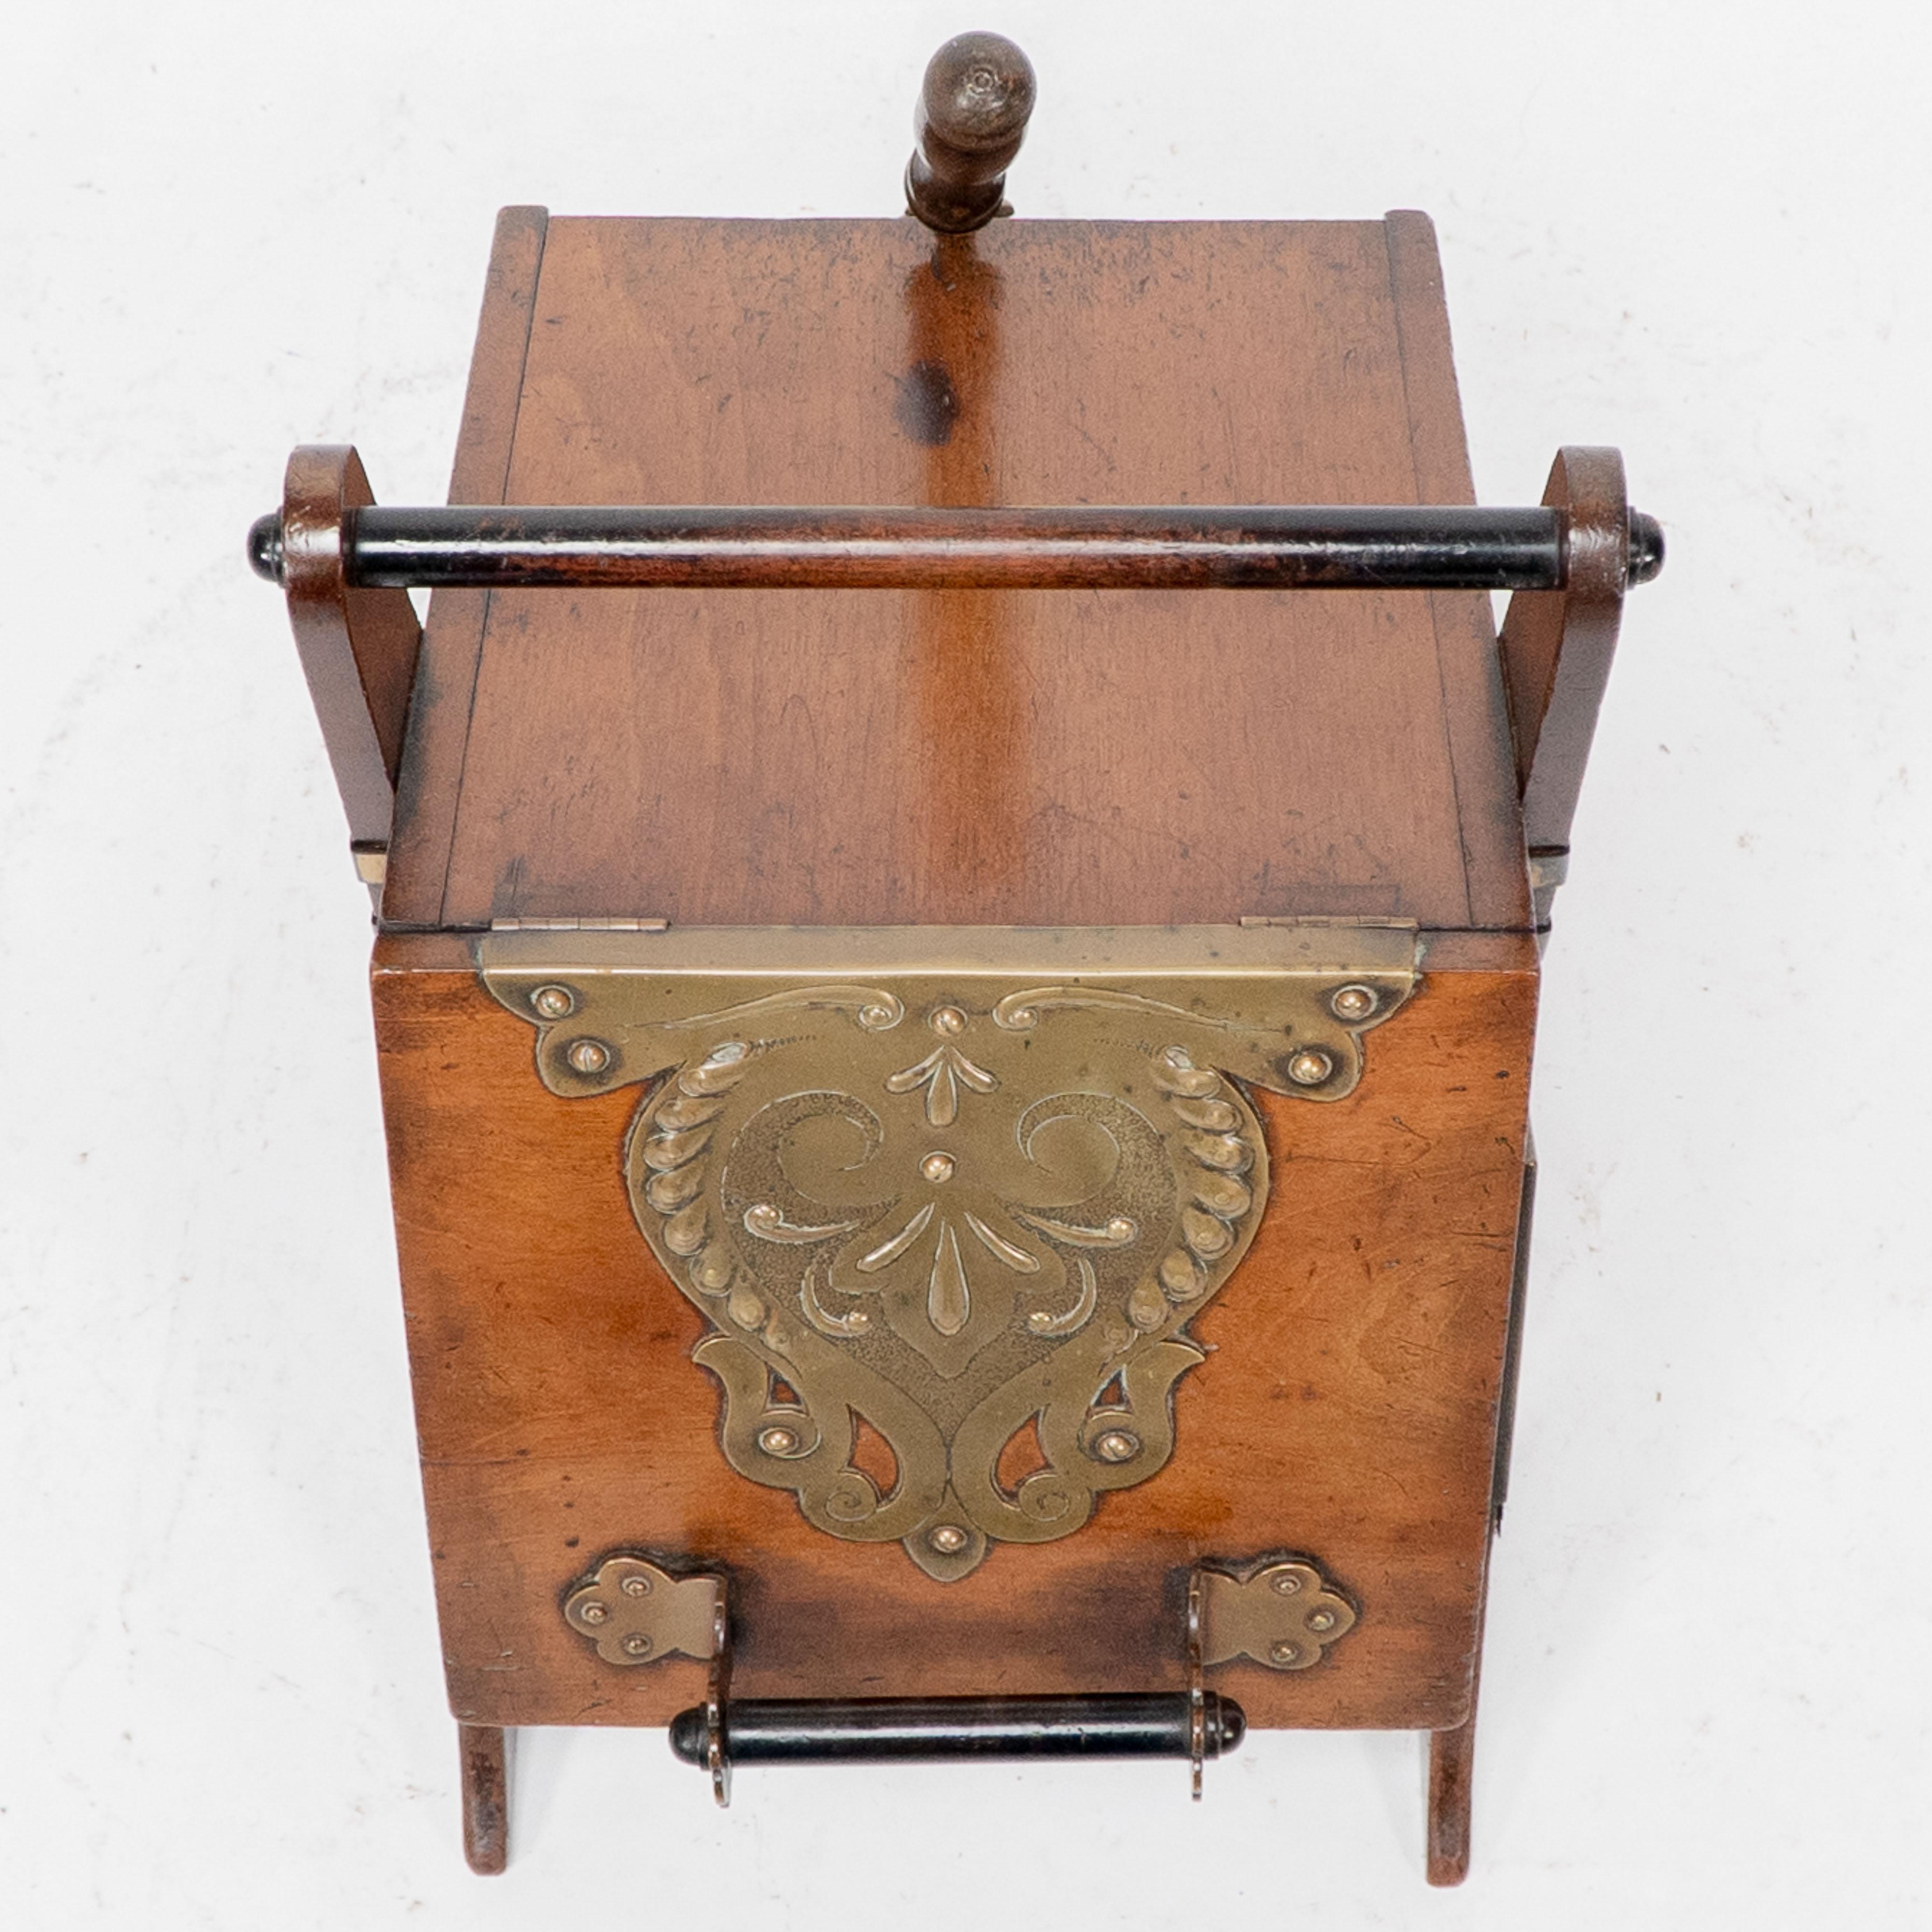 Dr C Dresser. An Aesthetic Movement walnut coal box with stylized brass panels For Sale 2